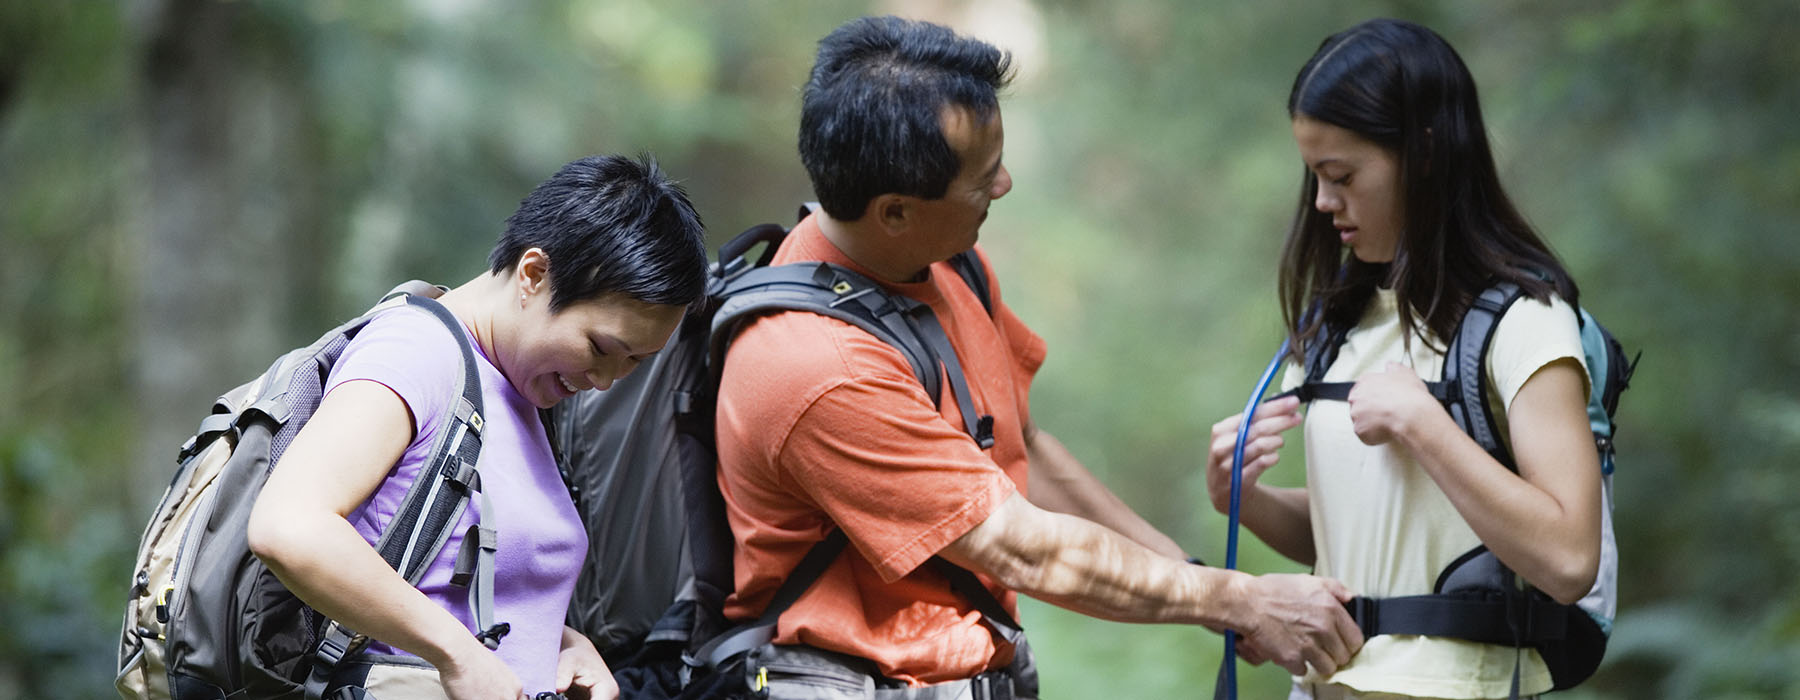 parents preparing for hike with daughter